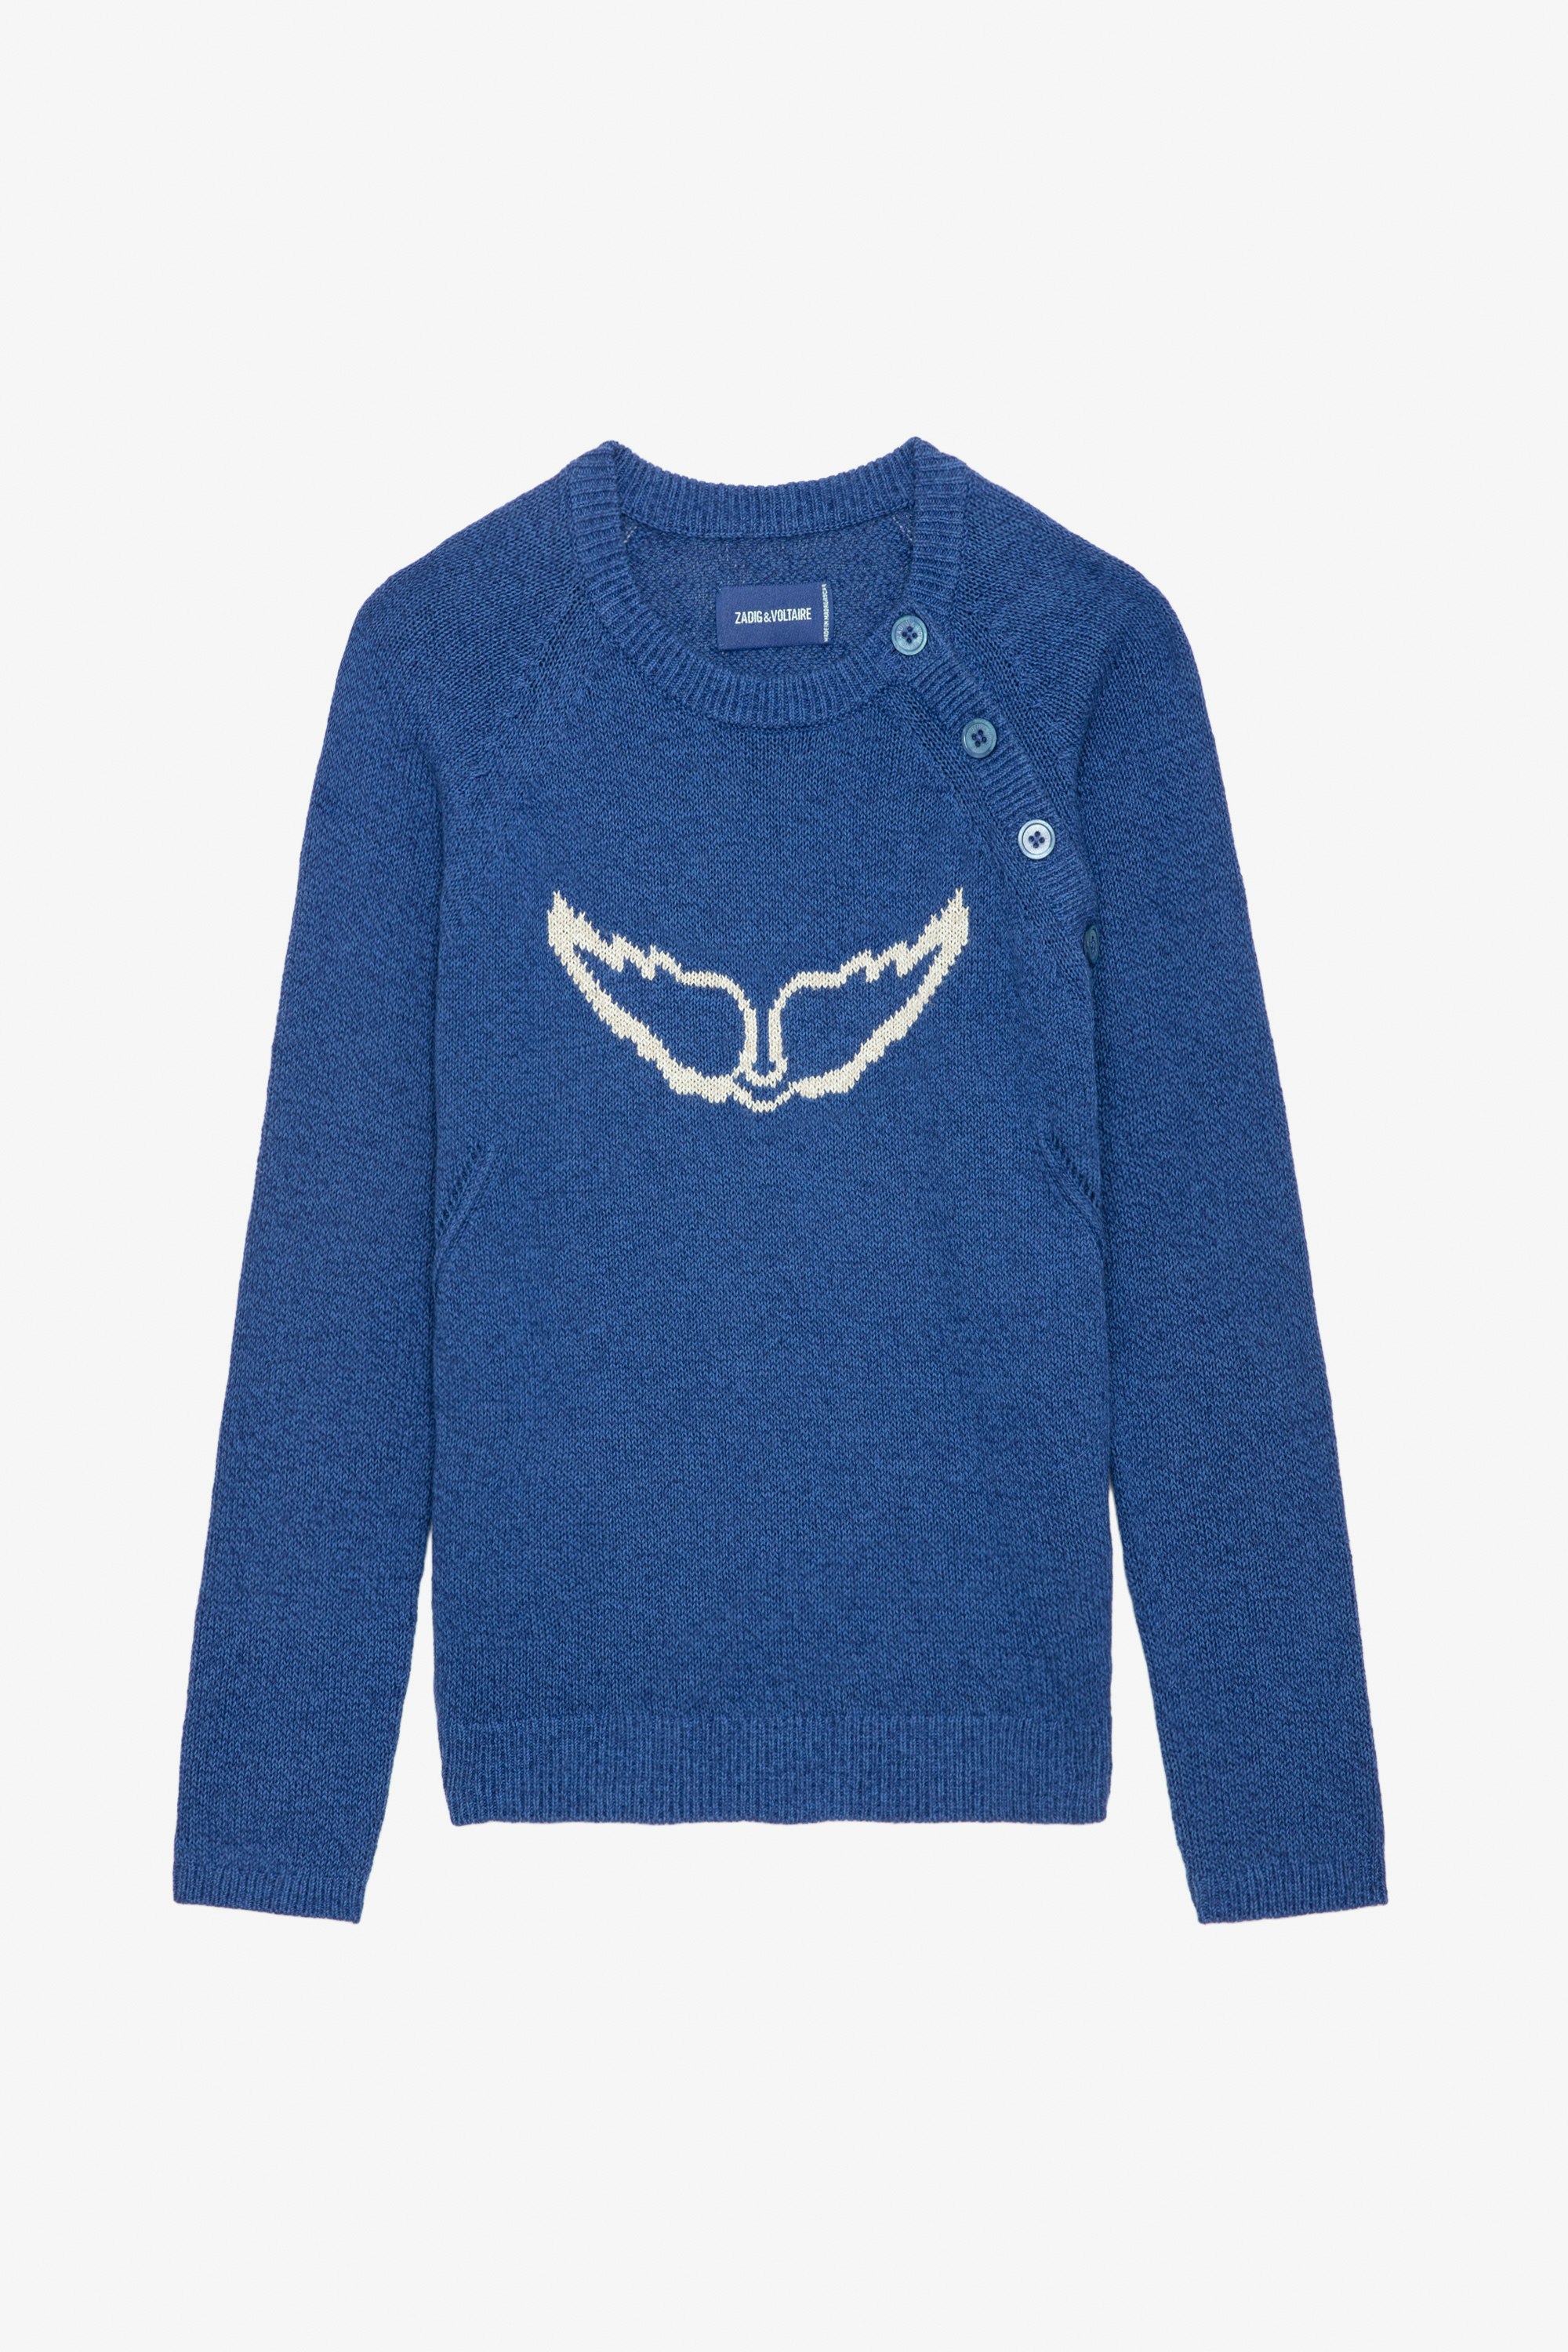 Regliss Wings Jumper - Blue linen cropped jumper with button closure and intarsia jacquard wings.